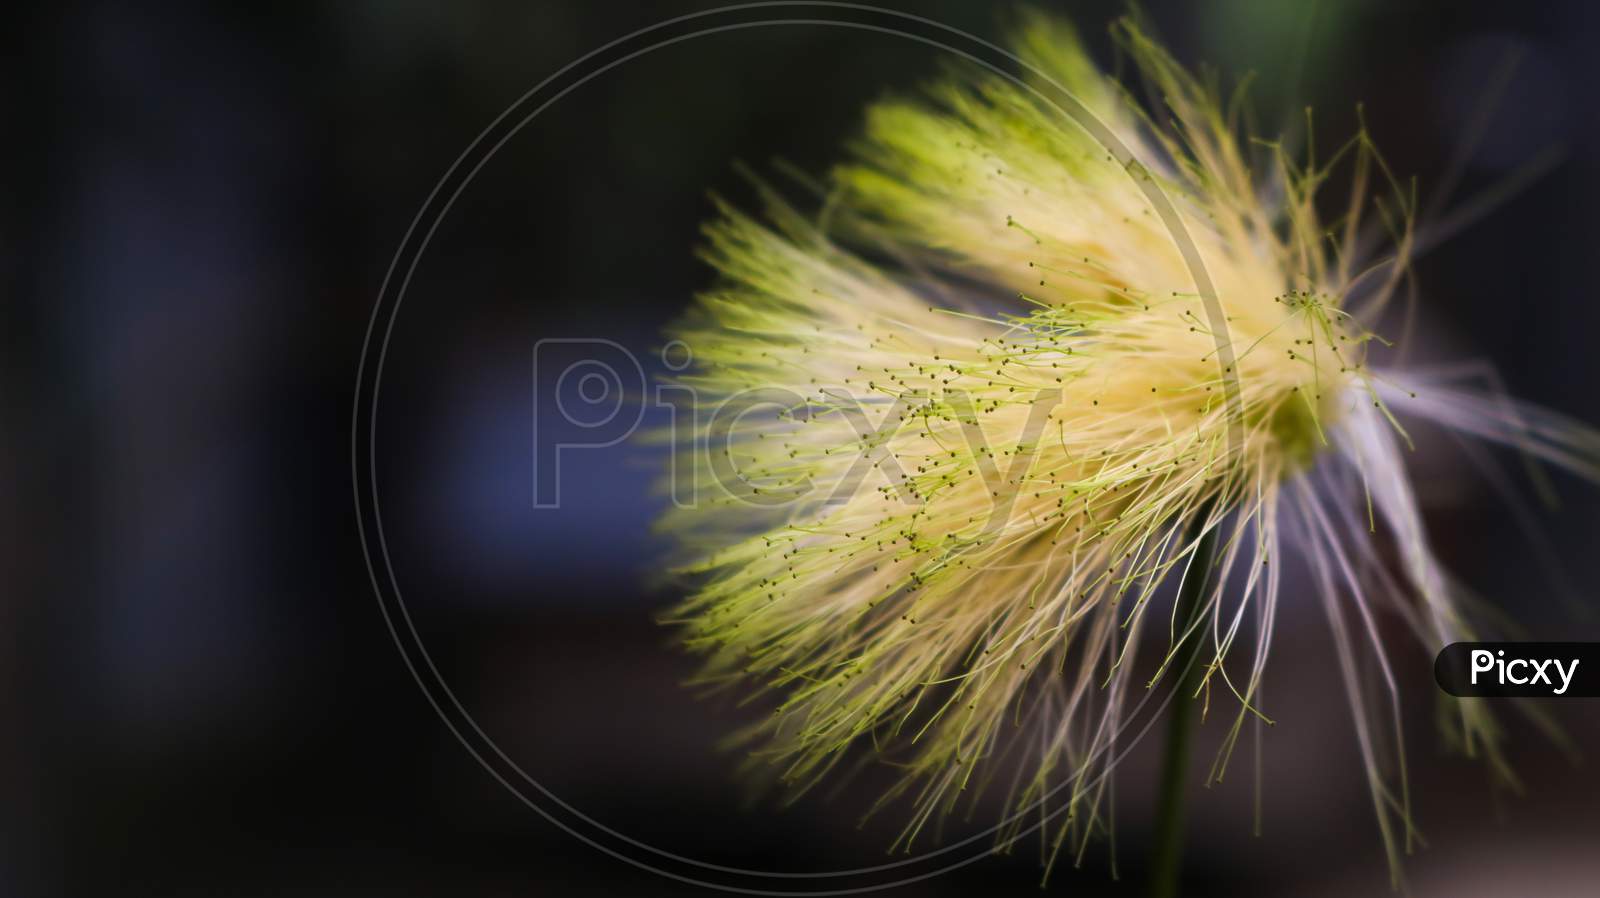 There Are Grass Flowers In The Field. Exposed To The Light Of Nature. Graphics Resource Background.